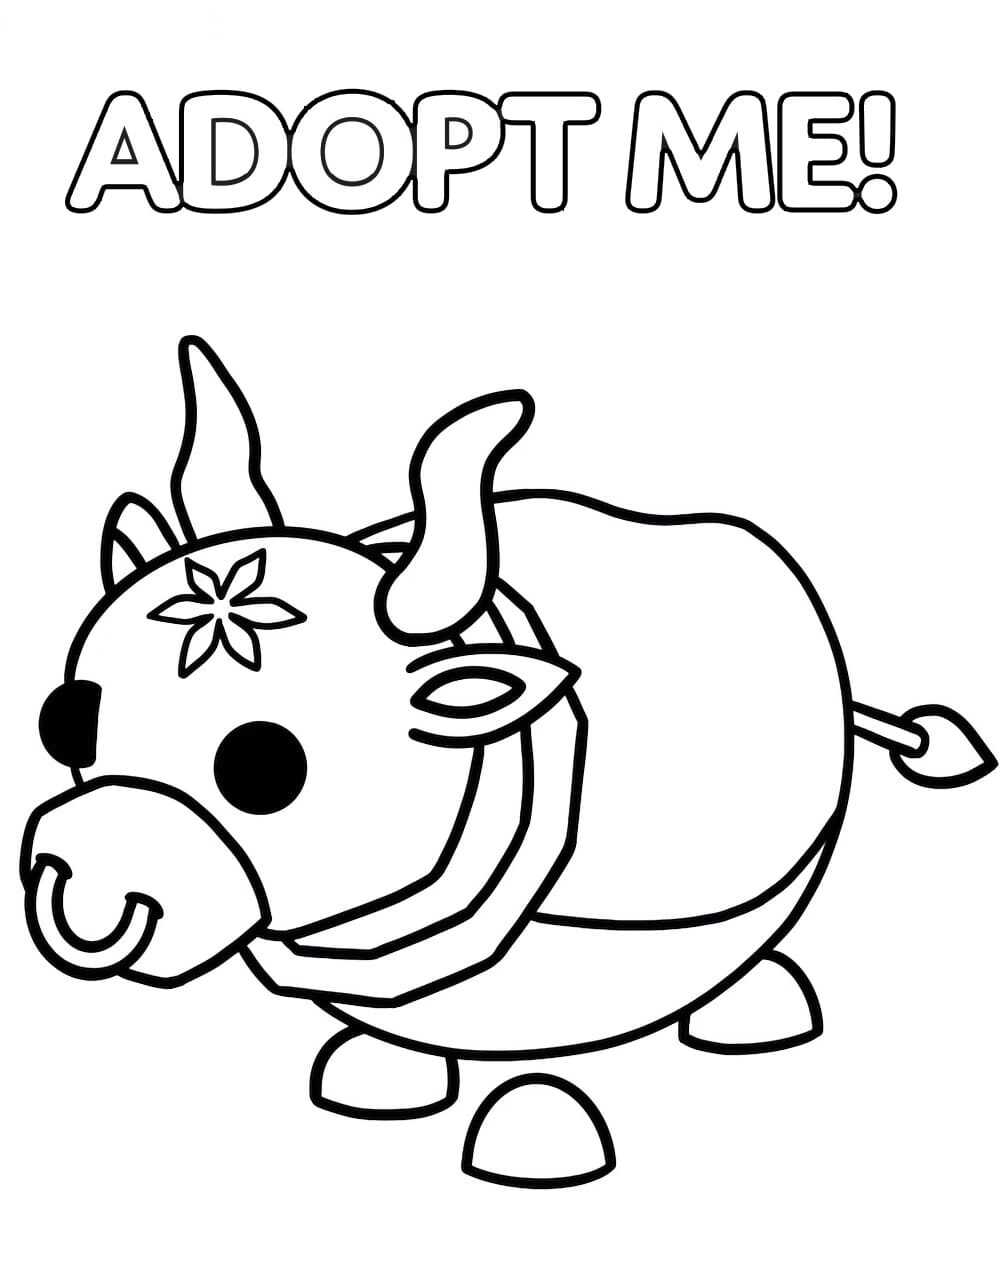 The Luna Ox has a ring in its nose from Adopt me Coloring Pages